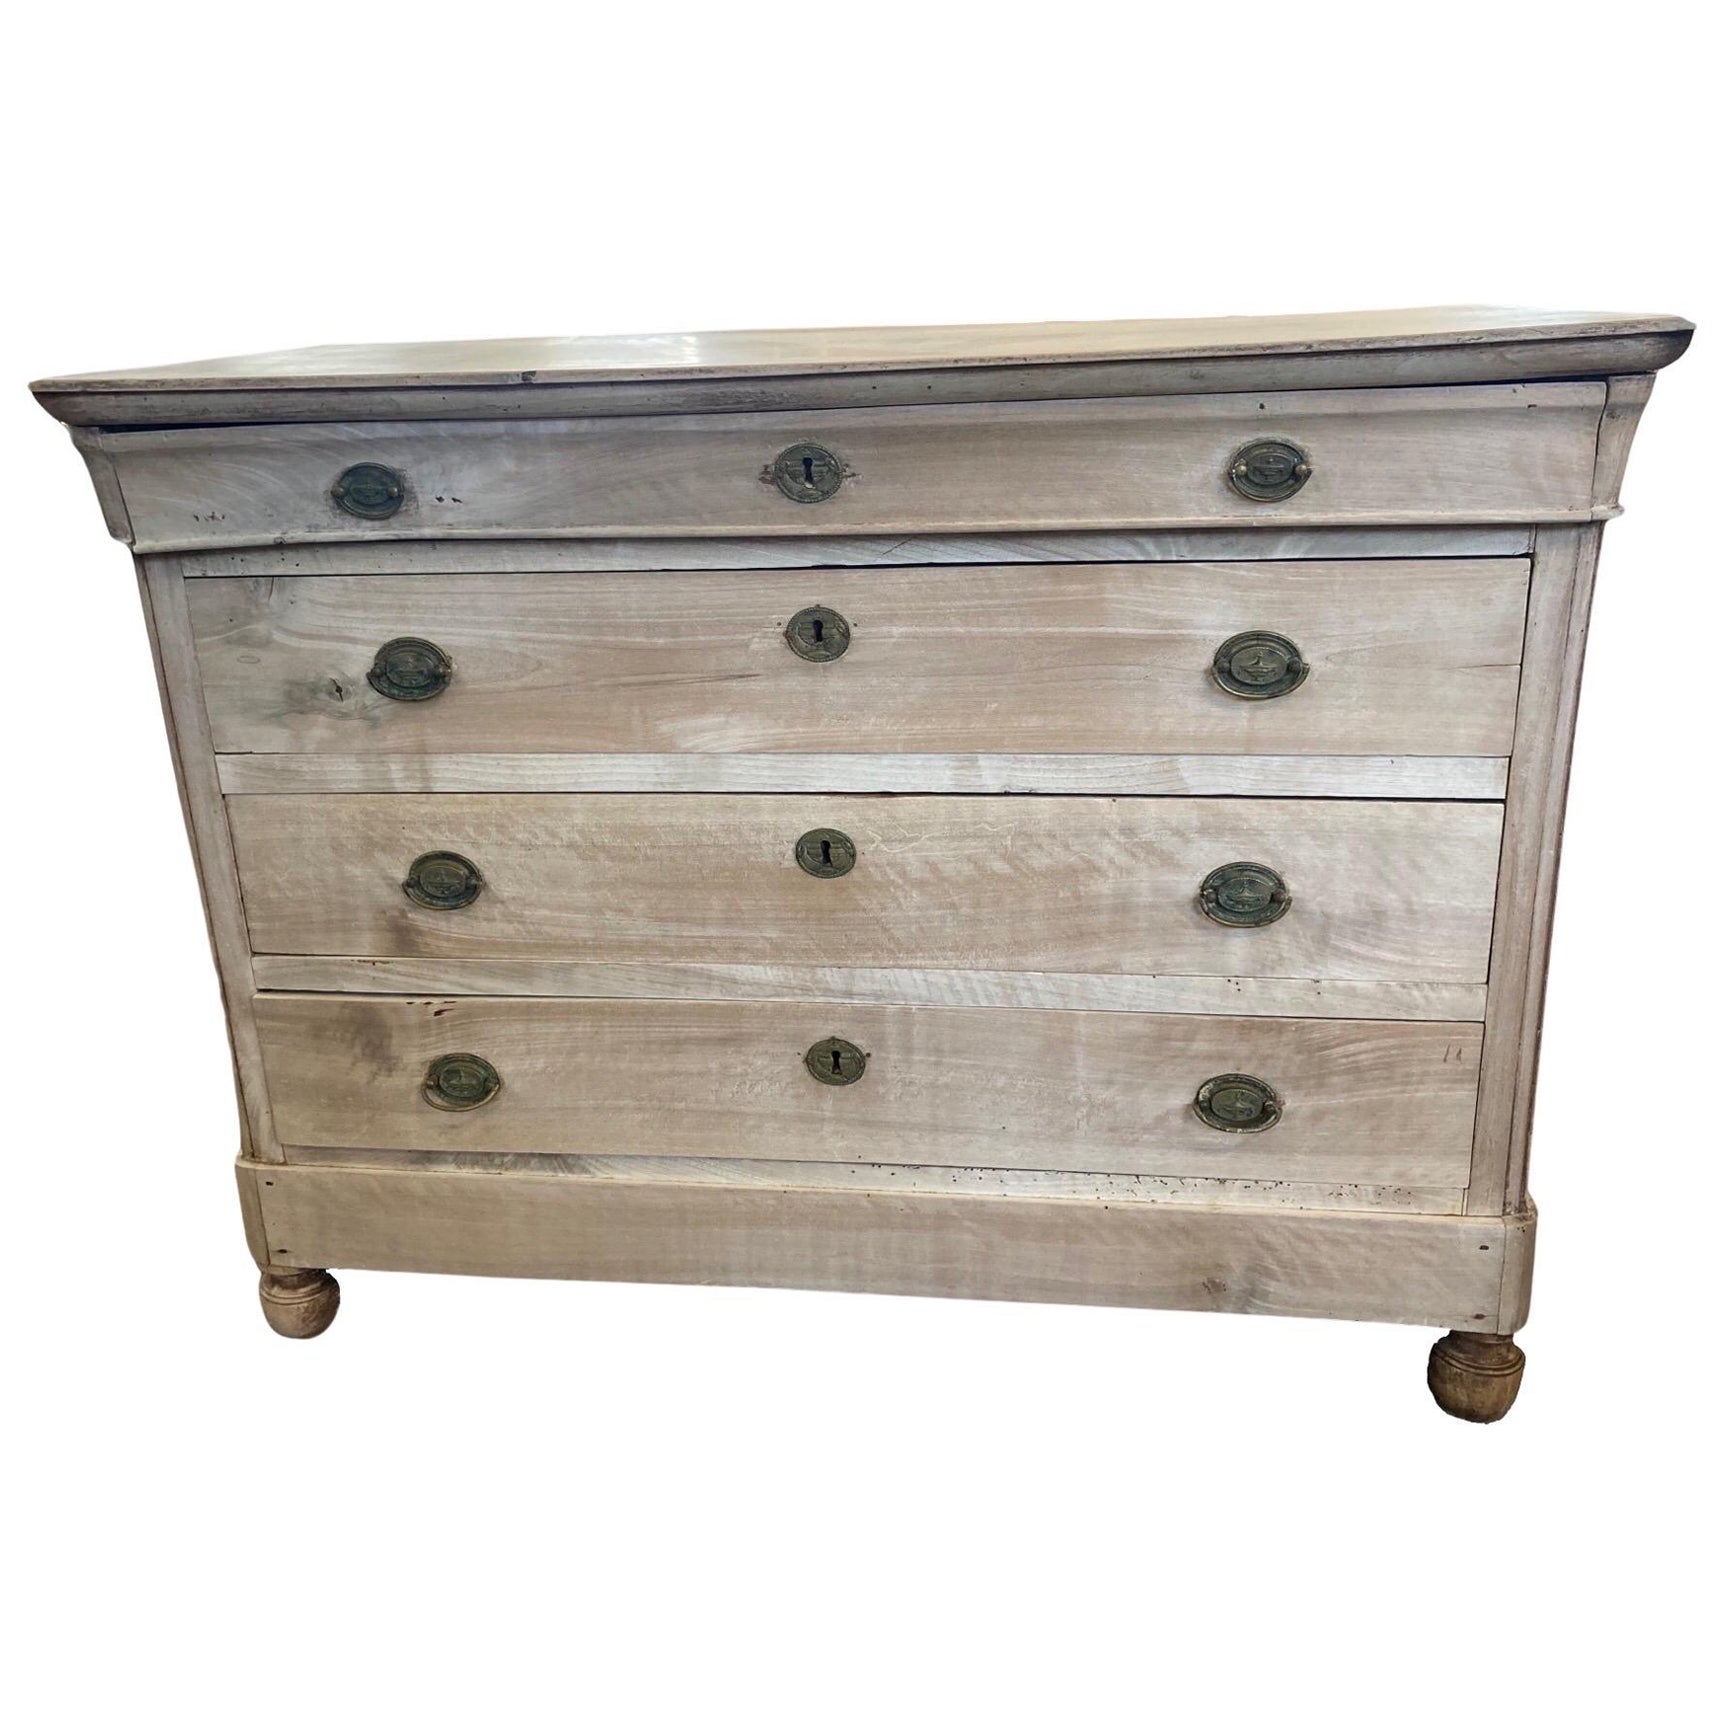 19th Century Italian Bleached Walnut Louis Philippe Commode / Chest of Drawers